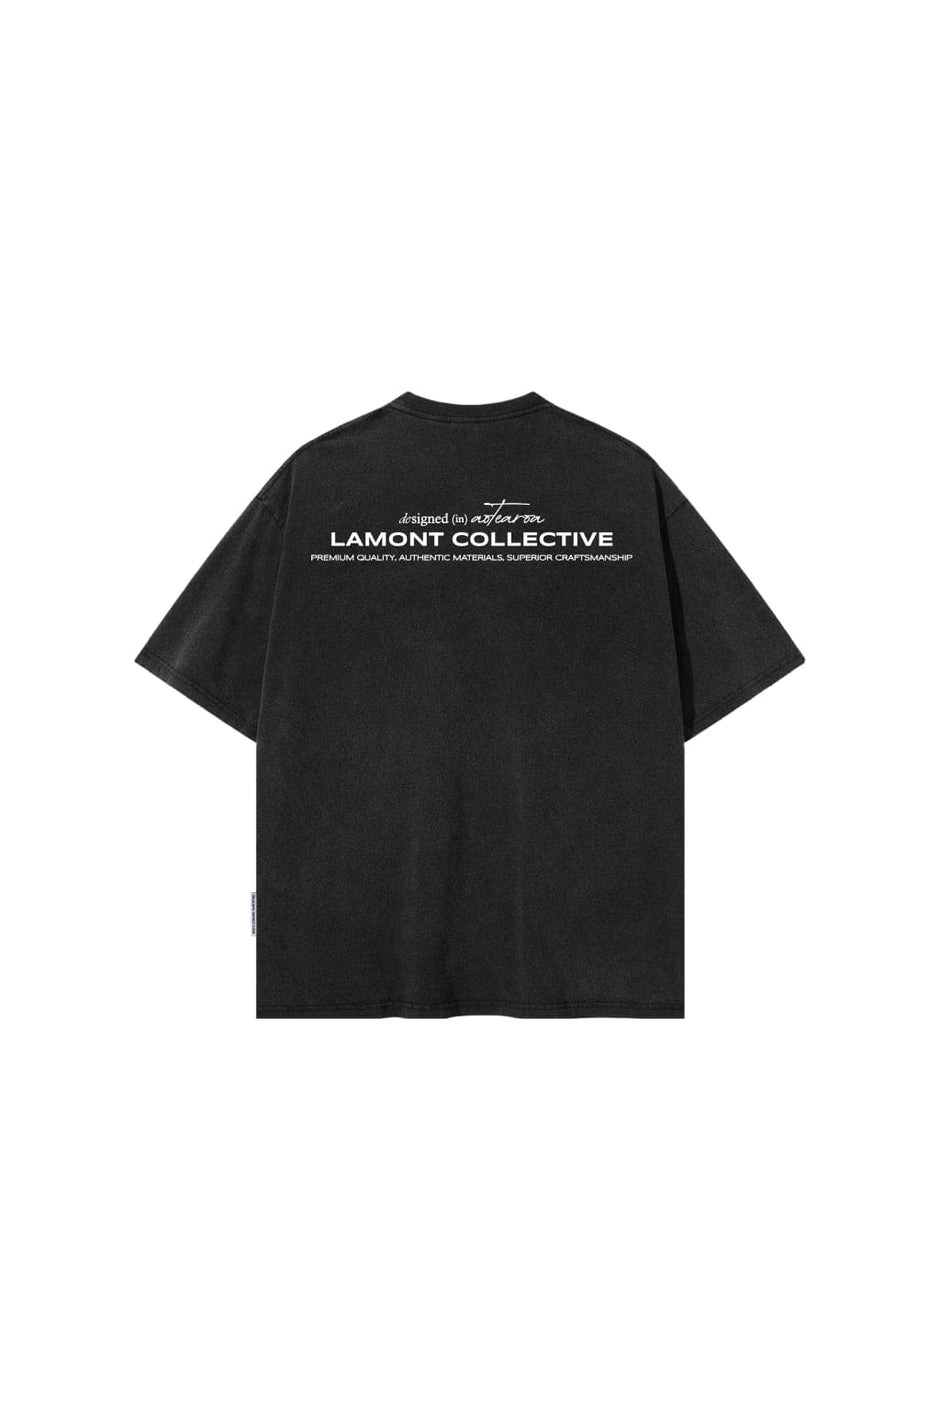 Lamont Collective